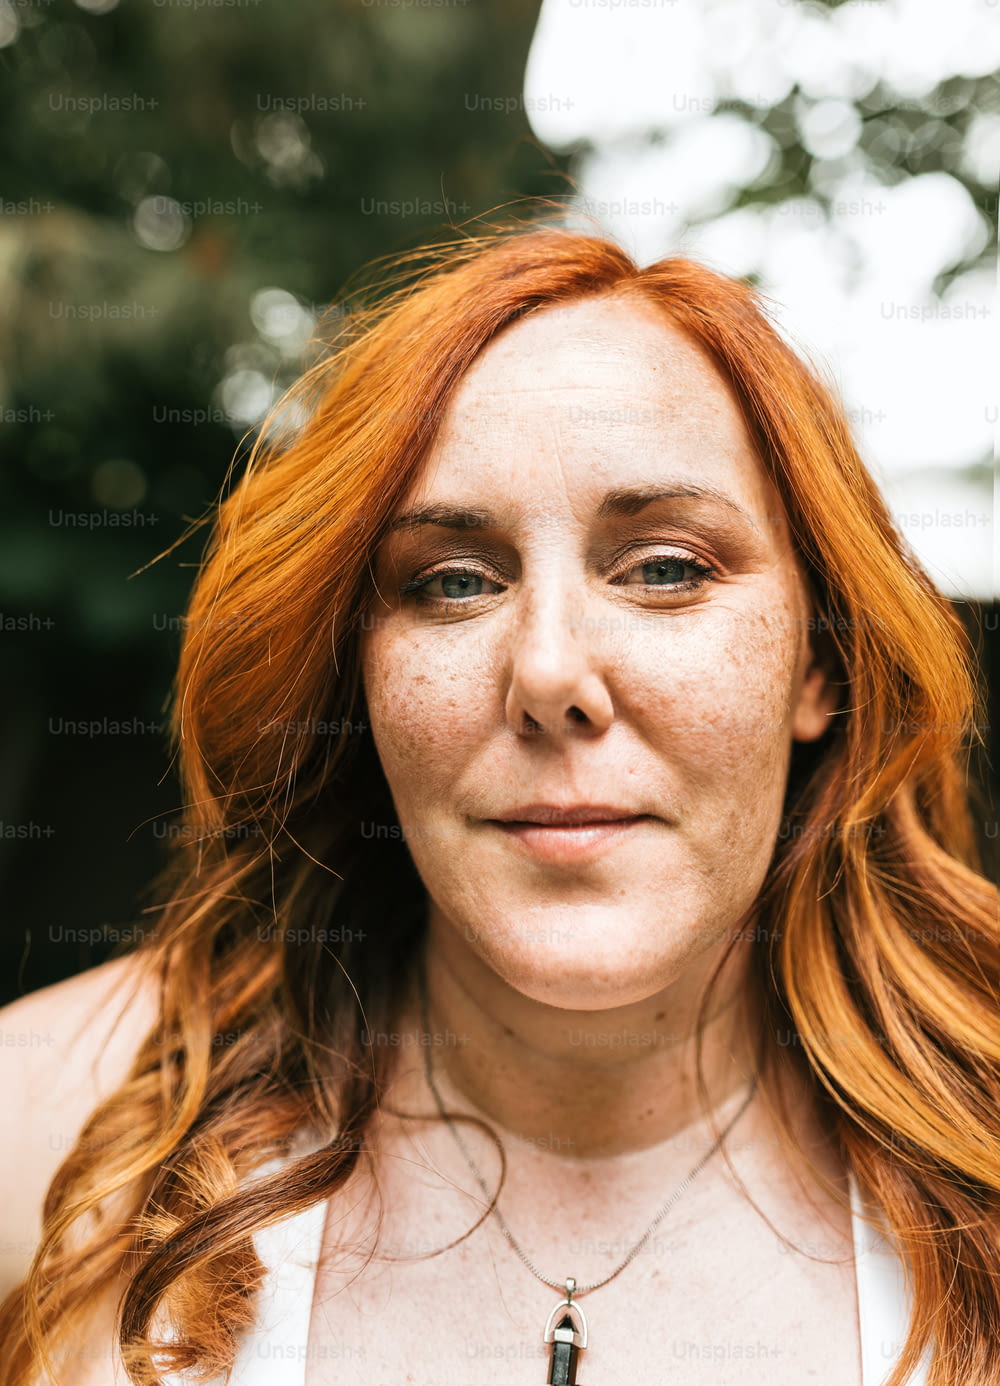 a close up of a person with red hair